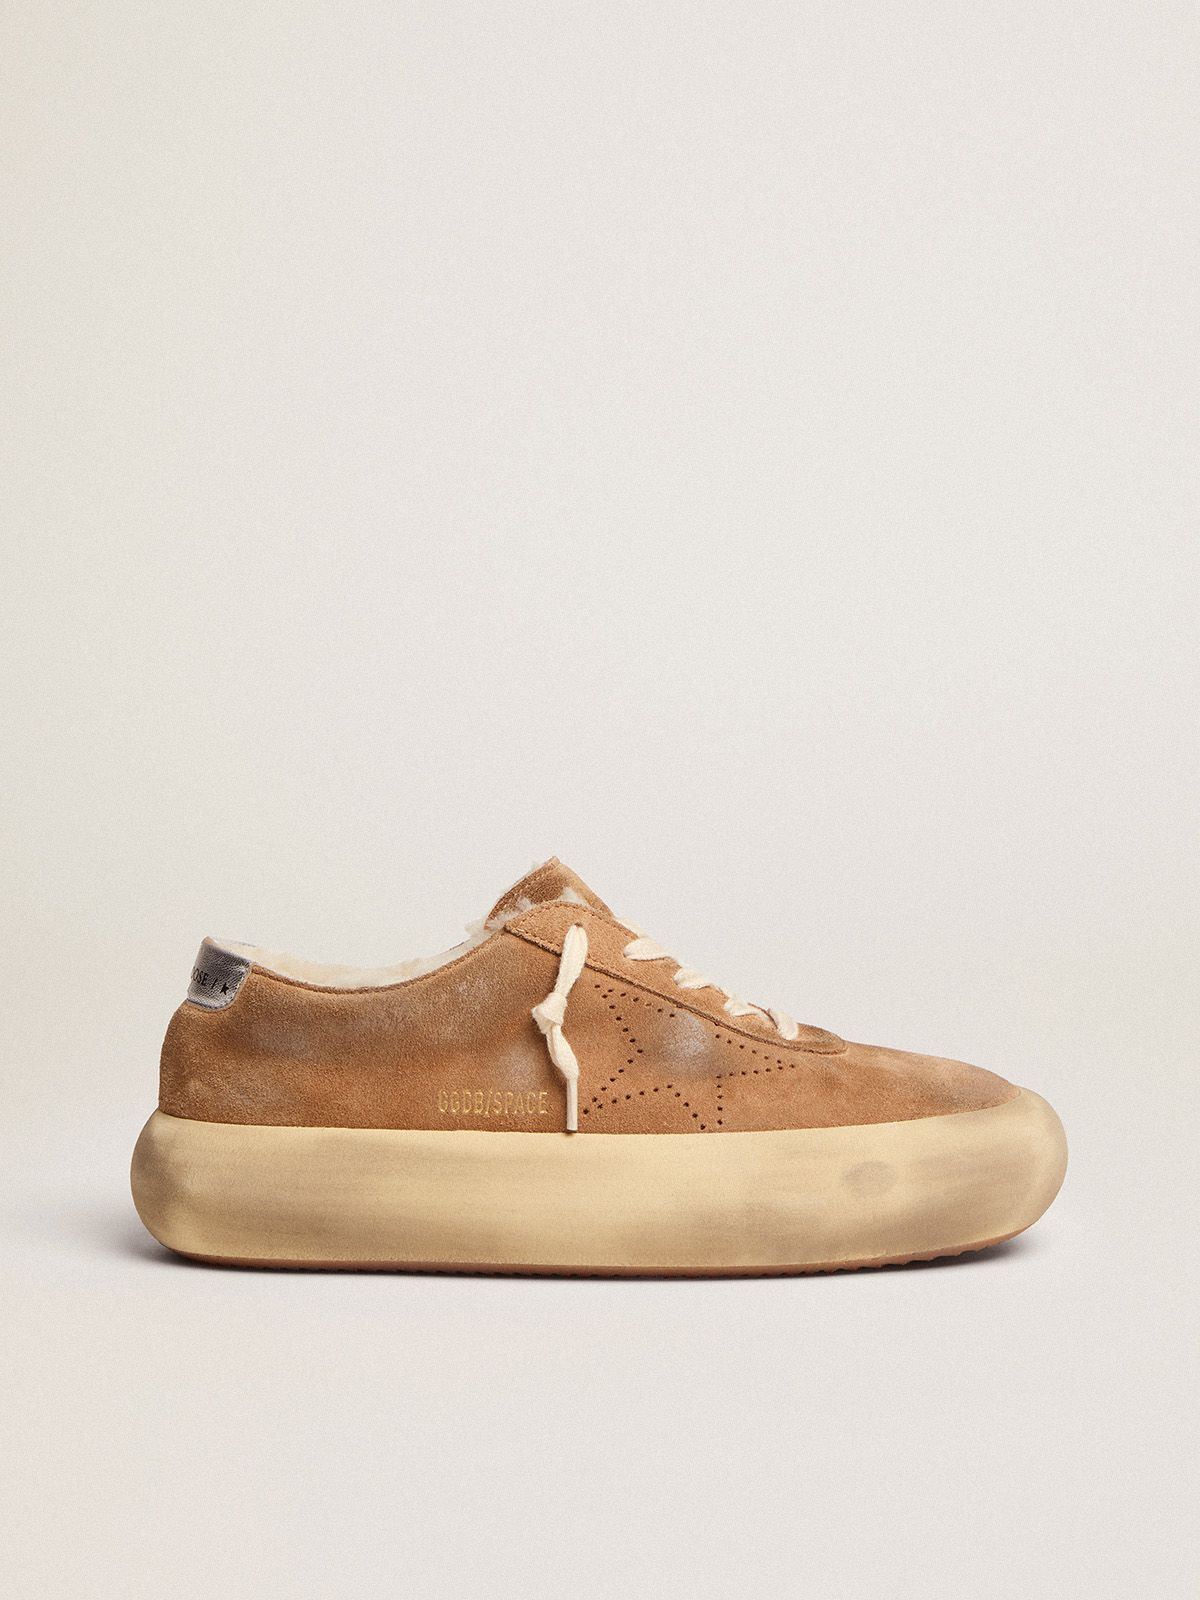 Space-Star shoes in tobacco-colored suede with shearling lining | 